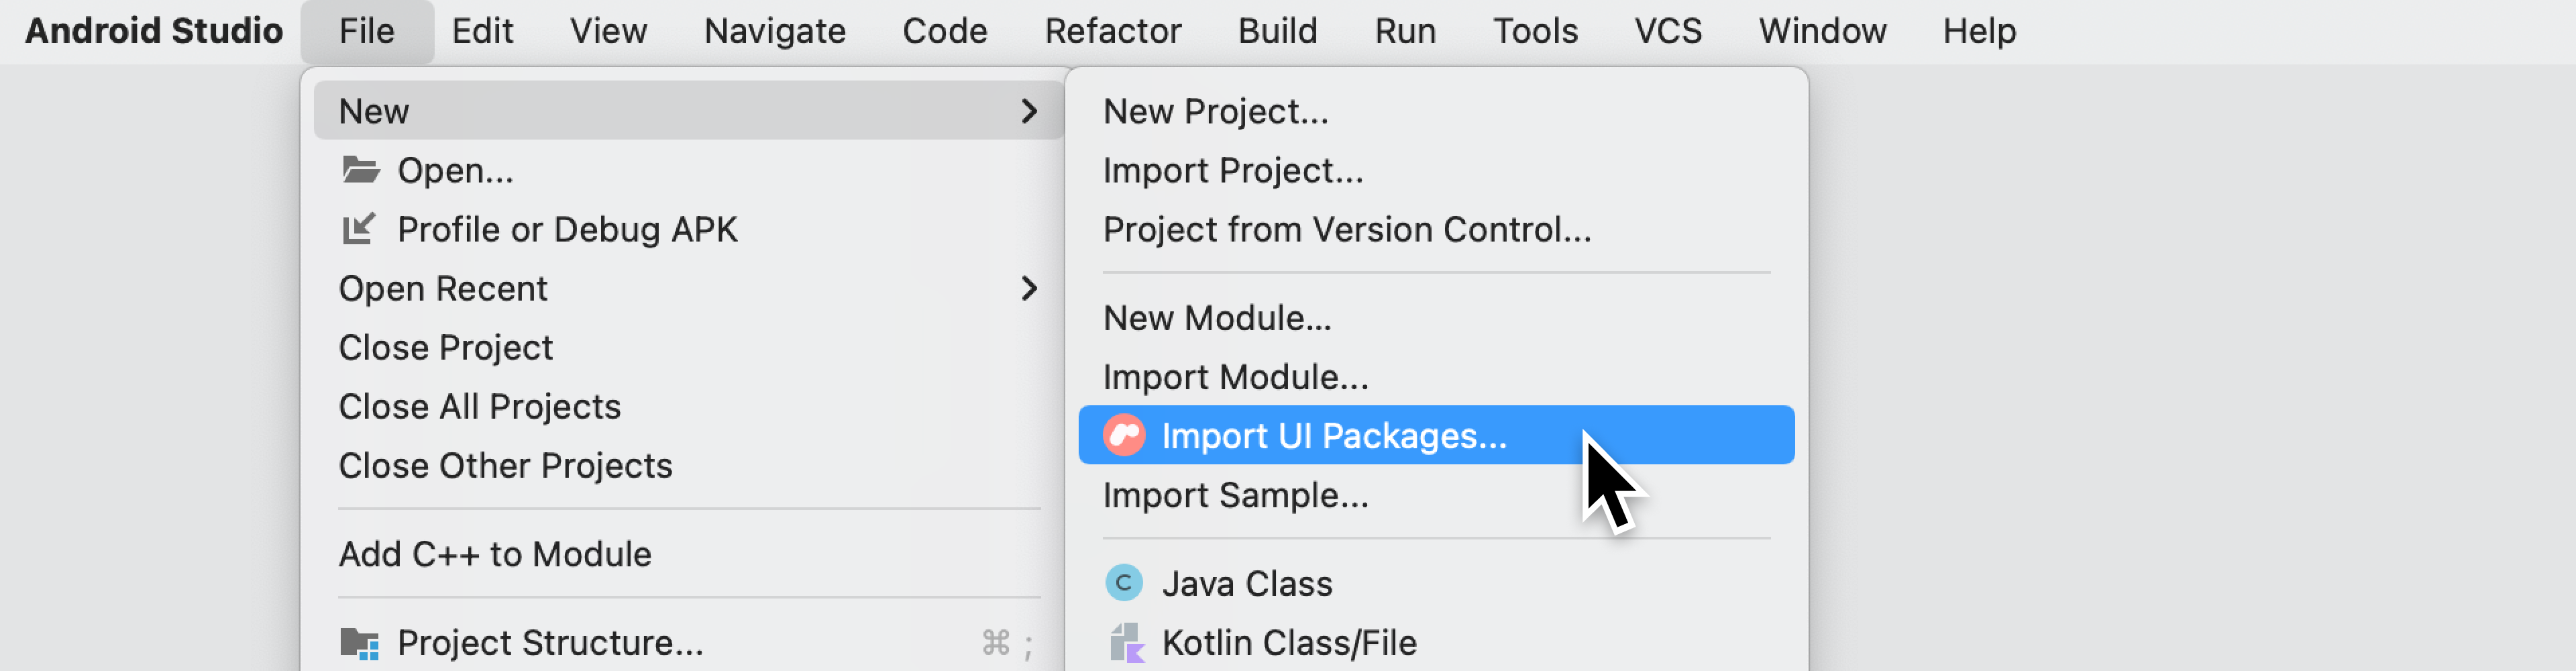 File 메뉴의 Import UI Packages… 옵션